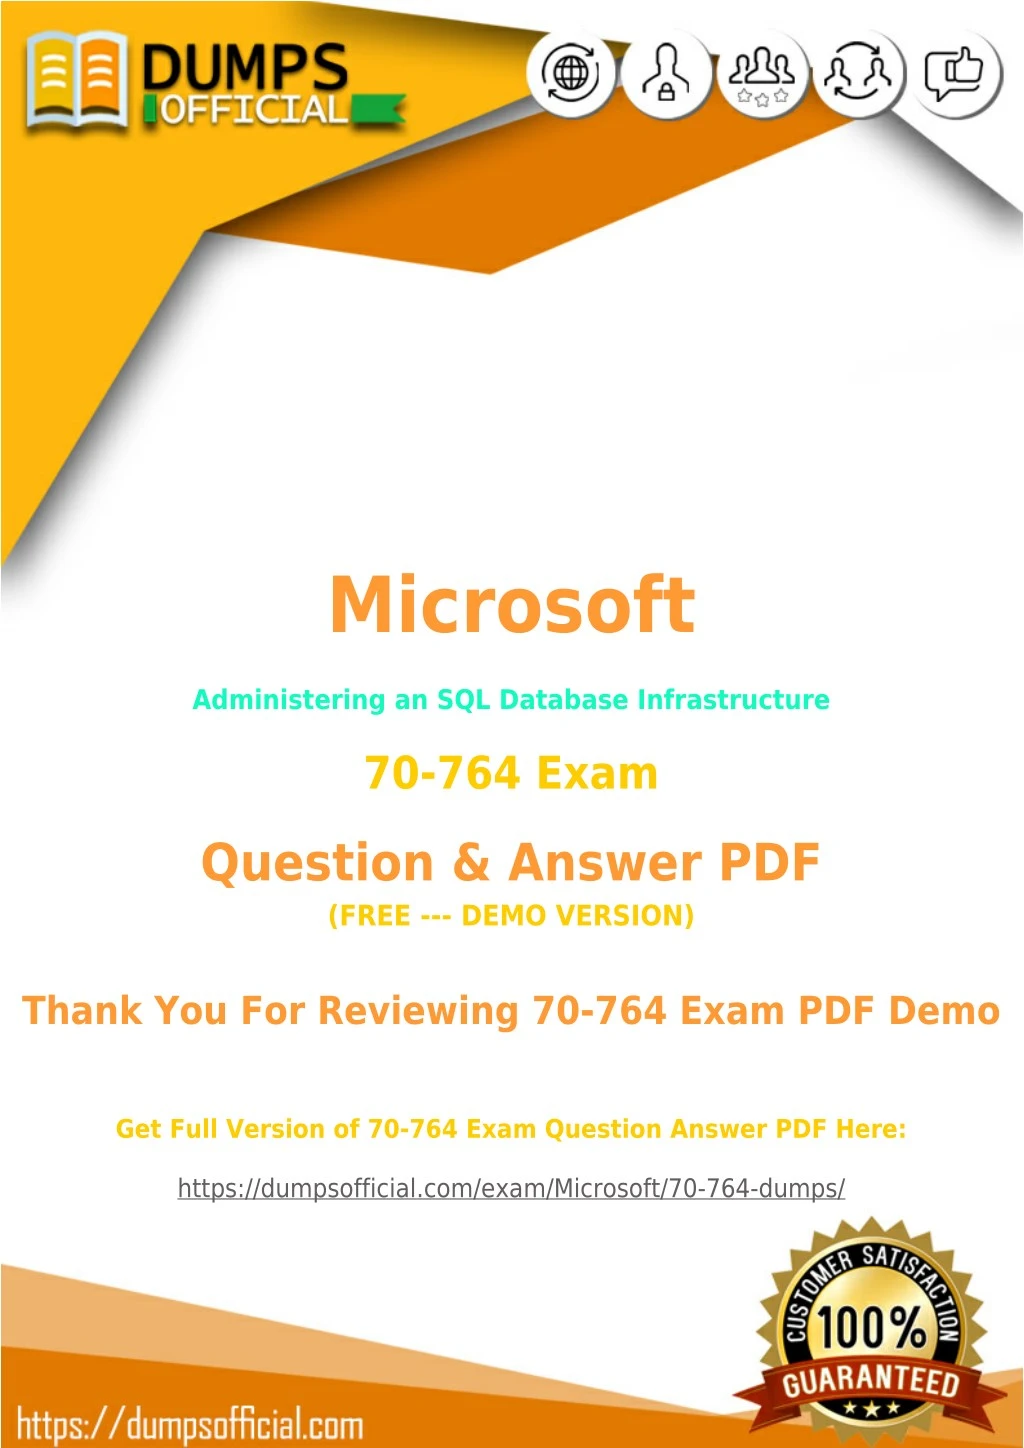 Ppt How To Pass Microsoft 70 764 Exam Easily Powerpoint Presentation